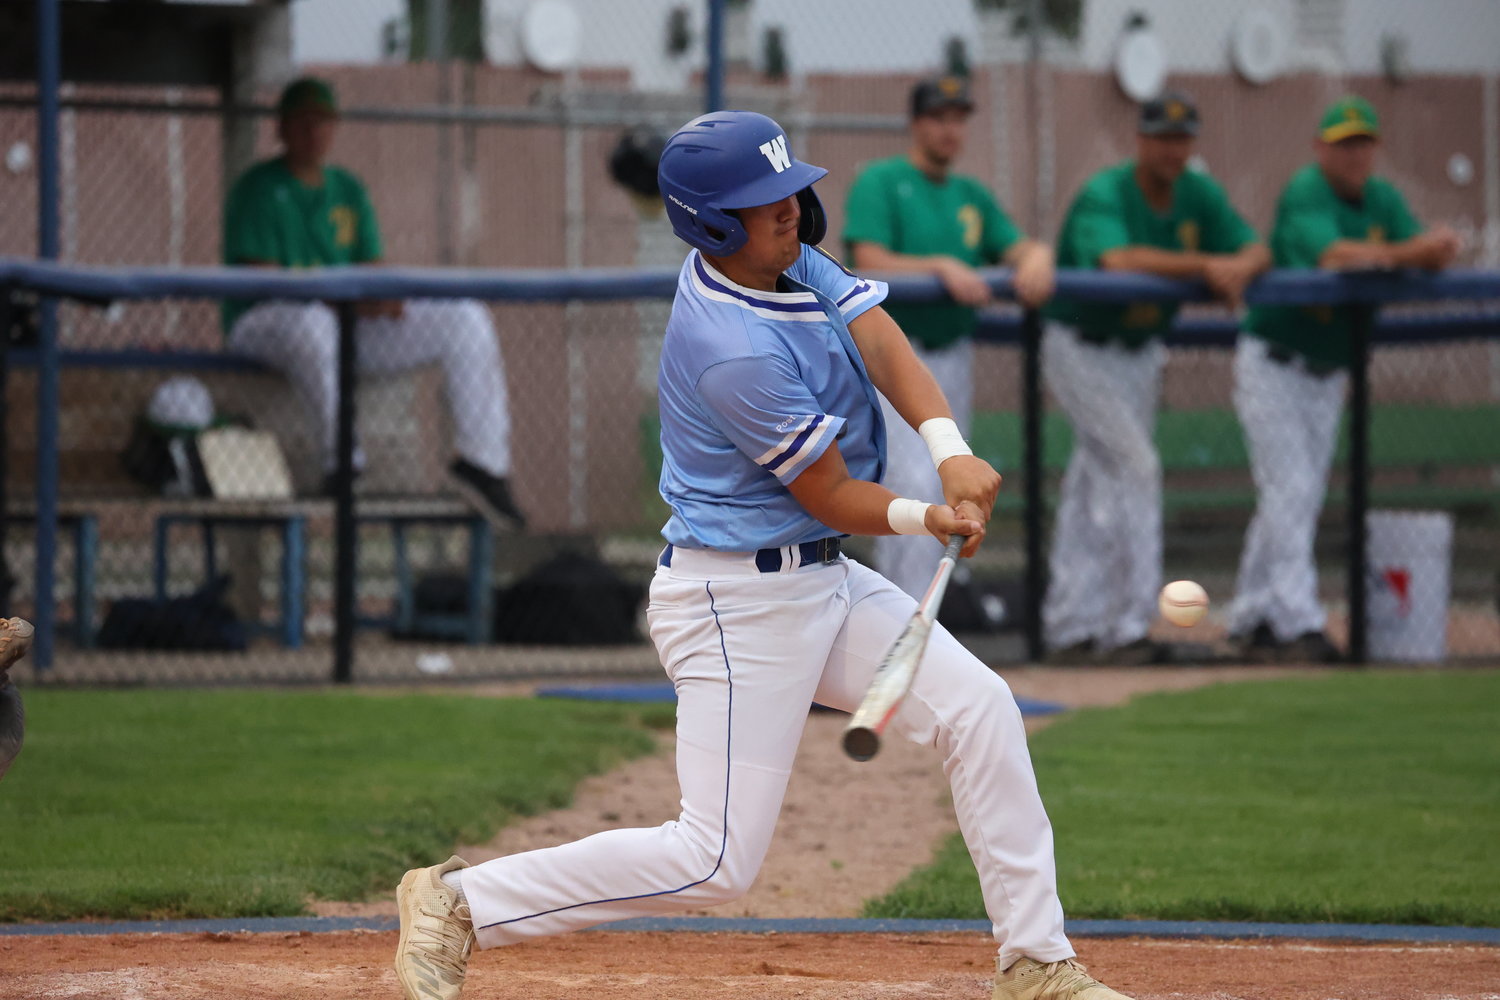 Brock Hopkins strokes a single for the Wayne Seniors during their home finale win over Wisner-Pilger-Howells-Dodge last week at Hank Overin Field. The Wayne Seniors will be the host team for the B-5 Area tournament that begins next Friday, July 22, at Hank Overin Field.